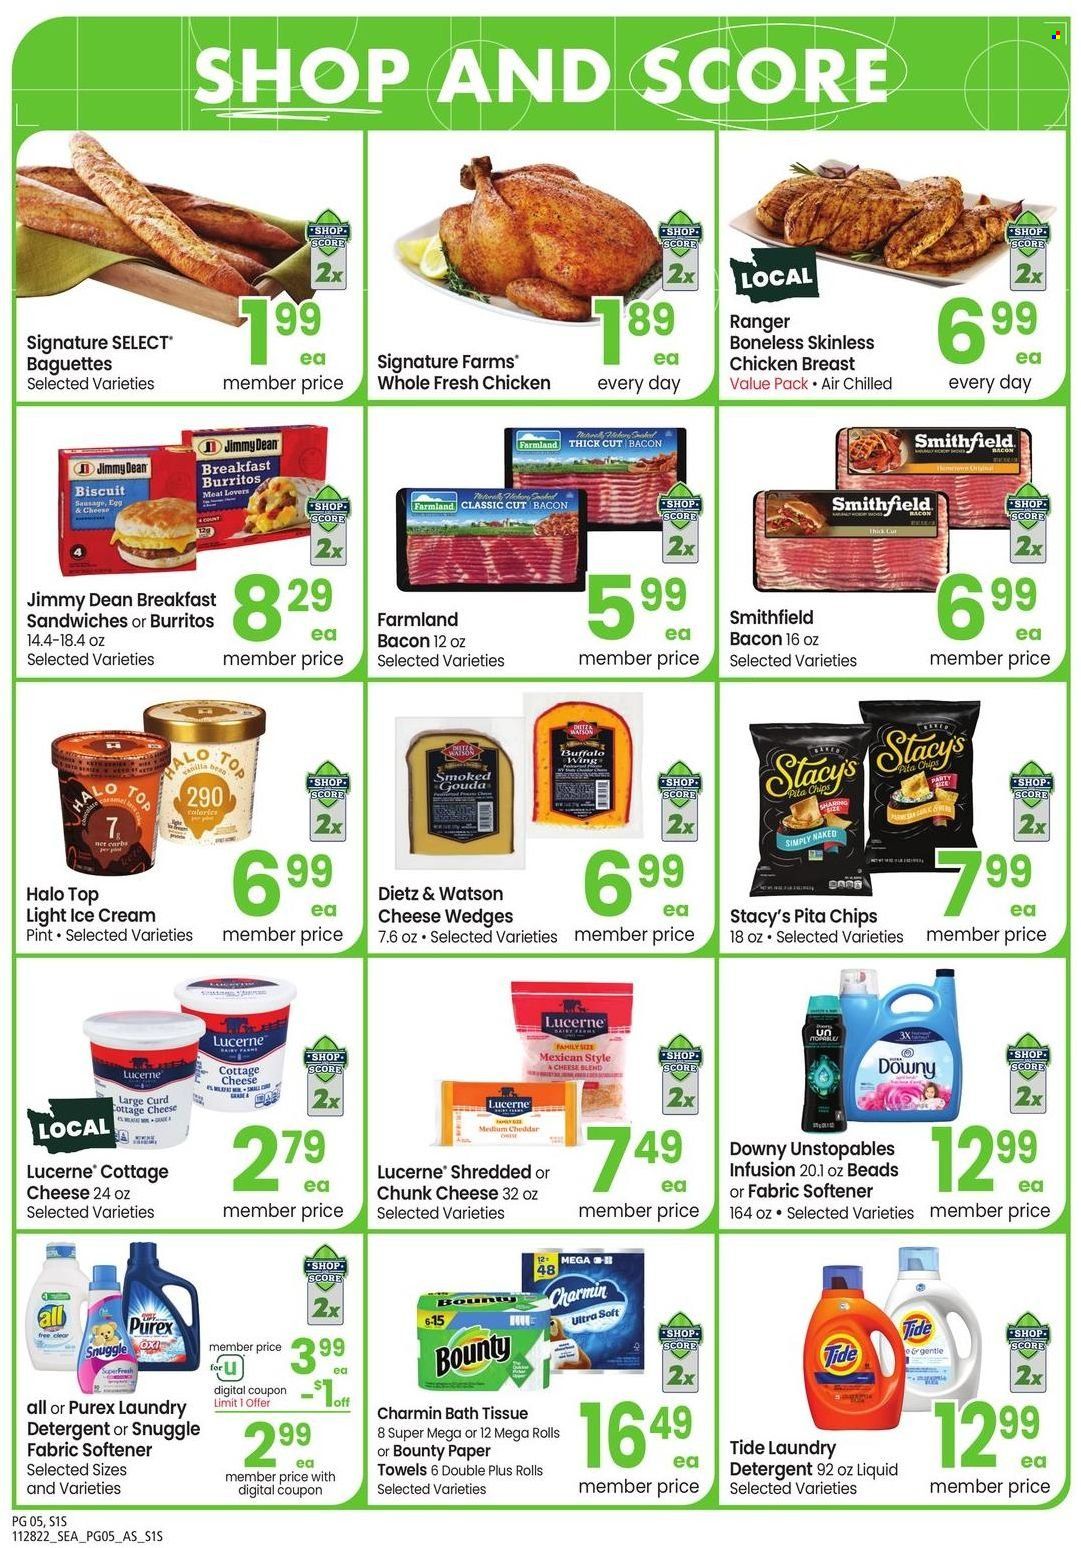 thumbnail - Safeway Flyer - 11/28/2022 - 01/01/2023 - Sales products - baguette, burrito, Jimmy Dean, bacon, Dietz & Watson, sausage, cottage cheese, gouda, curd, chunk cheese, eggs, ice cream, Bounty, biscuit, chips, pita chips, bath tissue, kitchen towels, paper towels, Charmin, detergent, Snuggle, Tide, Unstopables, fabric softener, laundry detergent, Purex. Page 5.